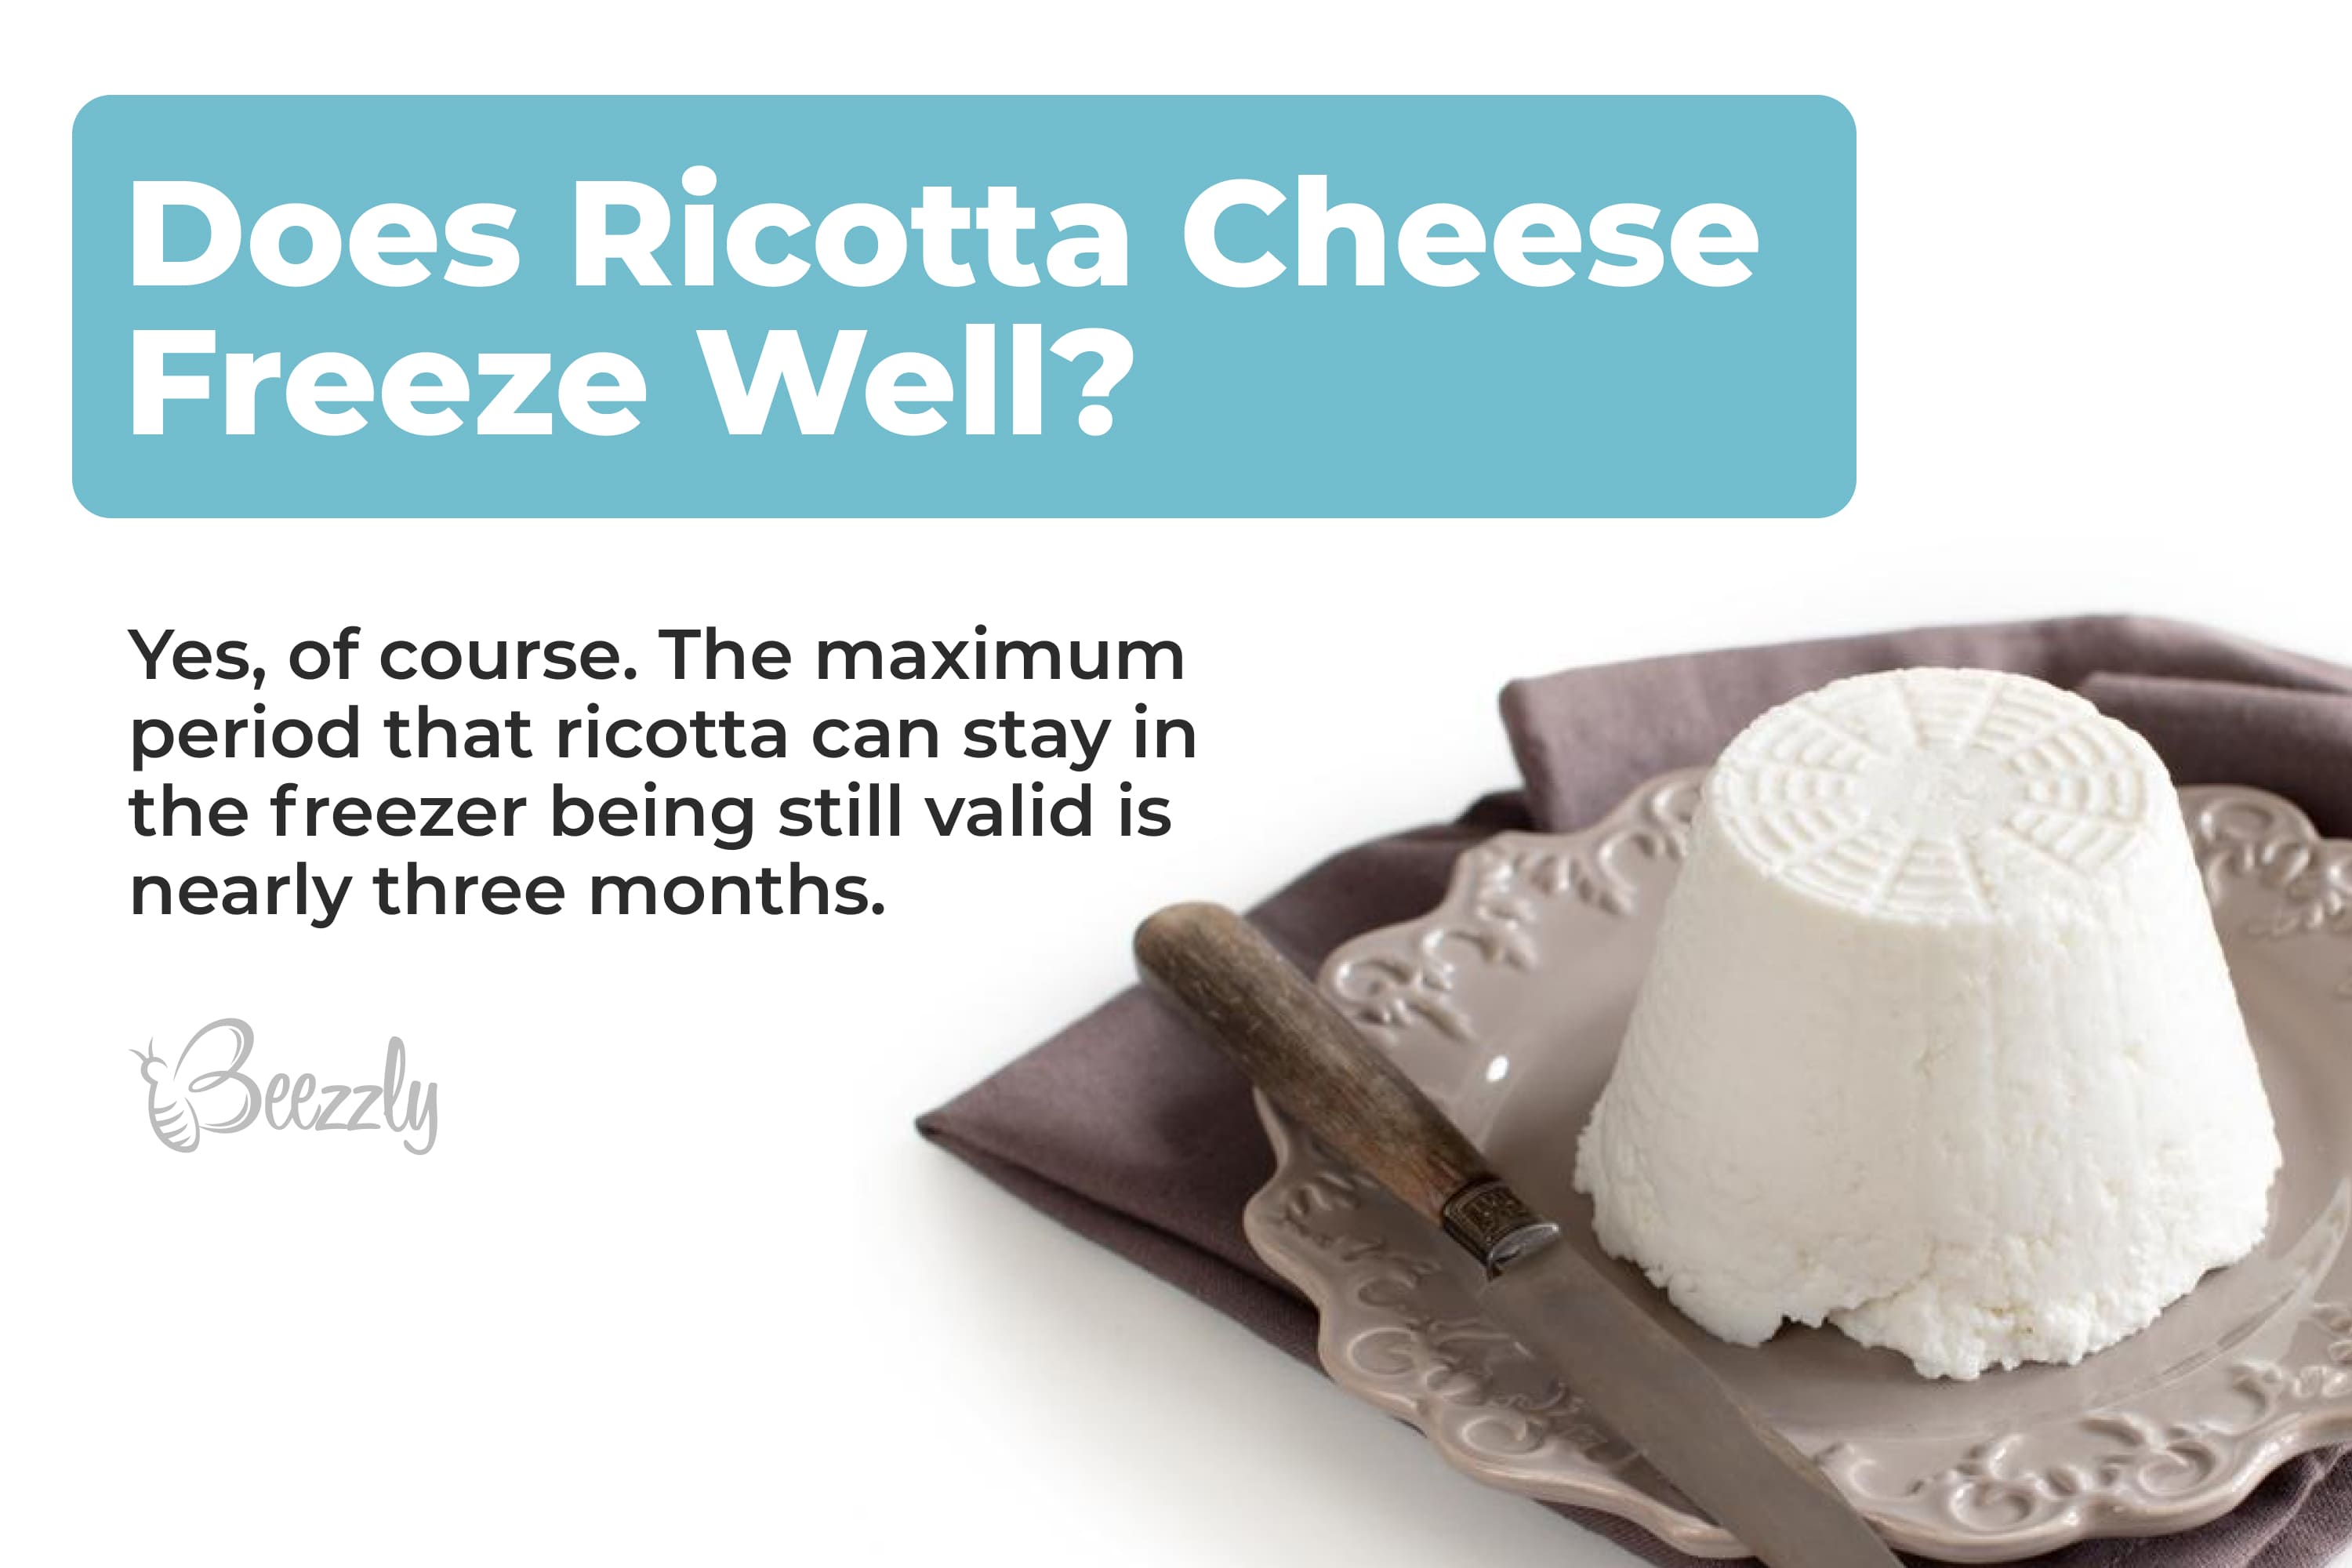 Does ricotta cheese freeze well